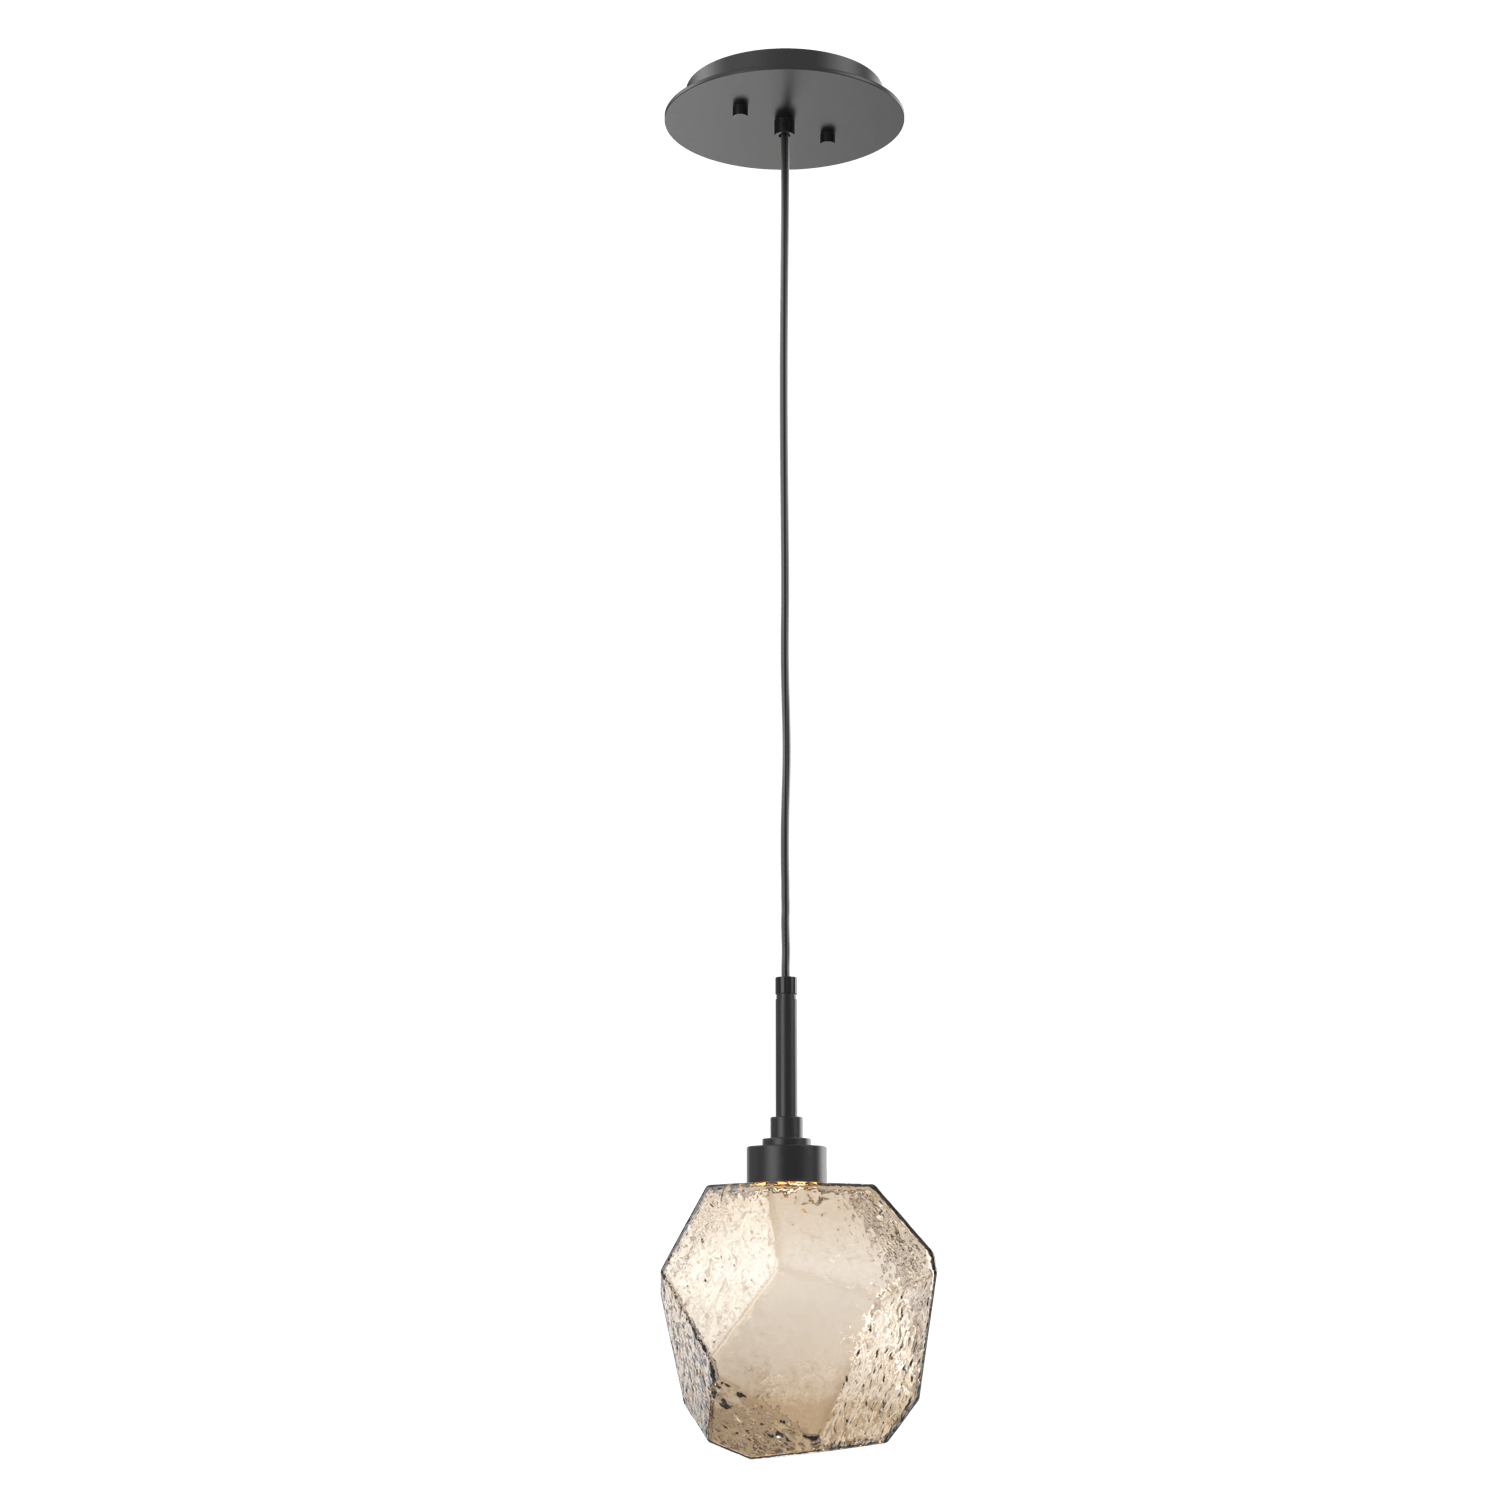 LAB0039-01-MB-B-Hammerton-Studio-Gem-pendant-light-with-matte-black-finish-and-bronze-blown-glass-shades-and-LED-lamping